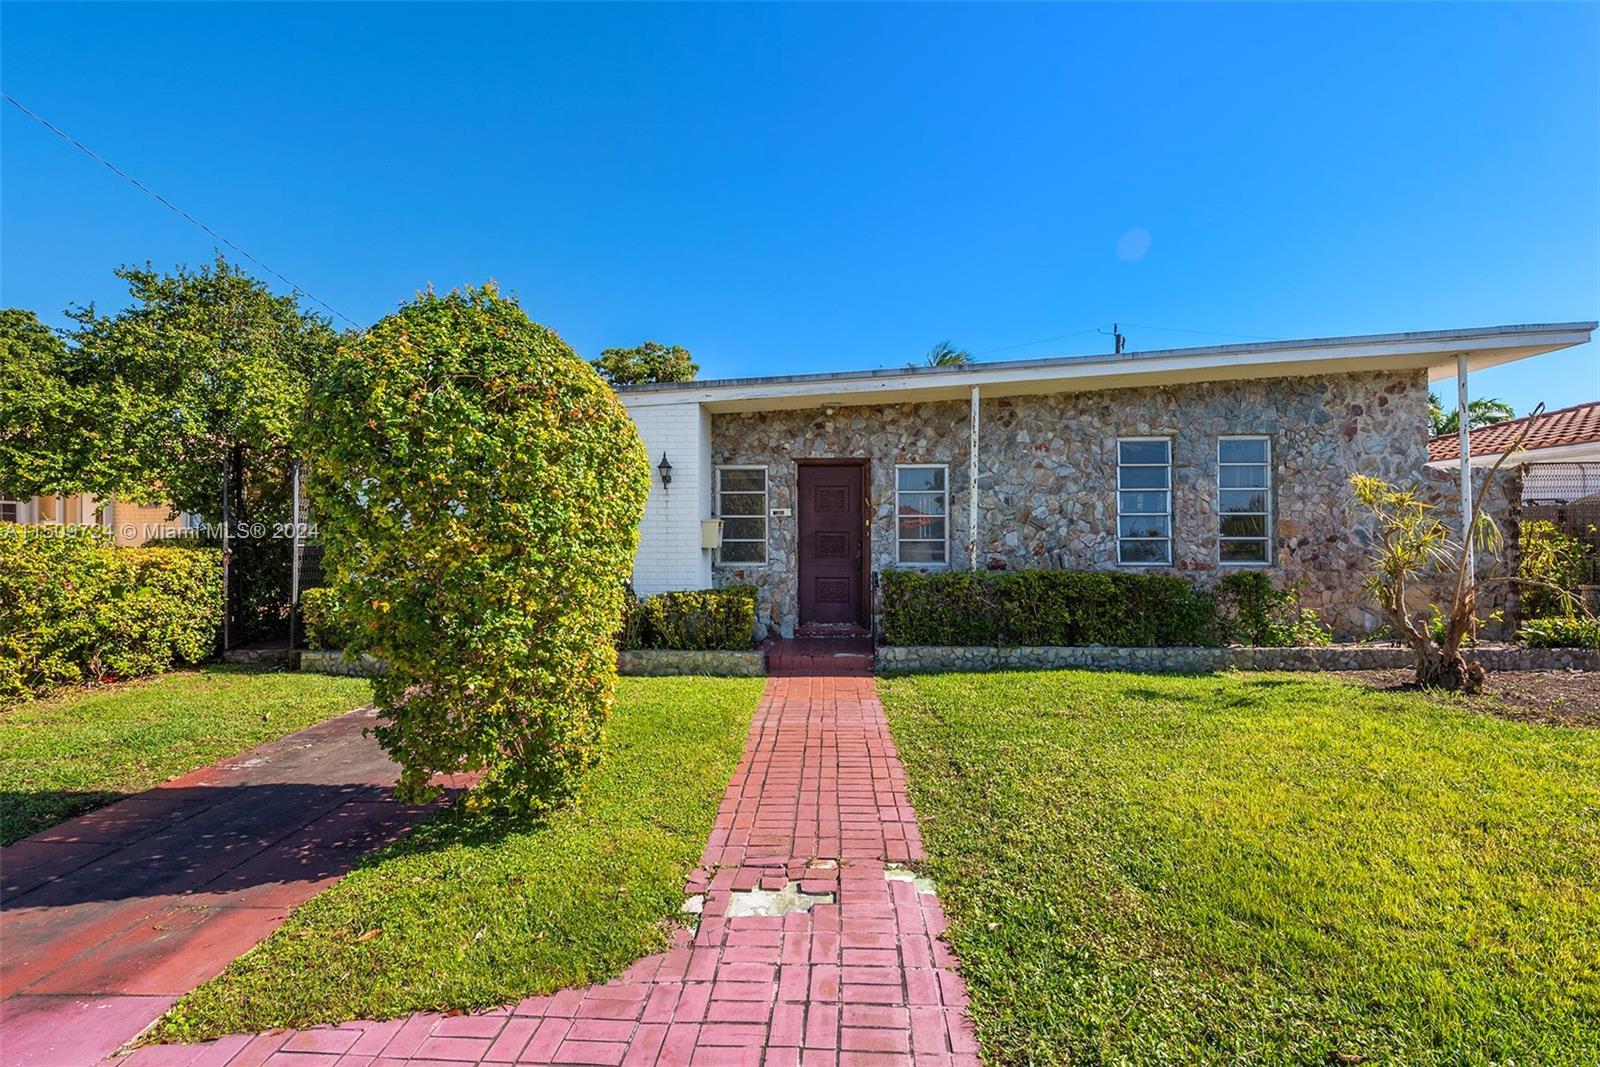 Lowest priced single-family home in all of North Bay Village and Miami Beach combined! Incredible op